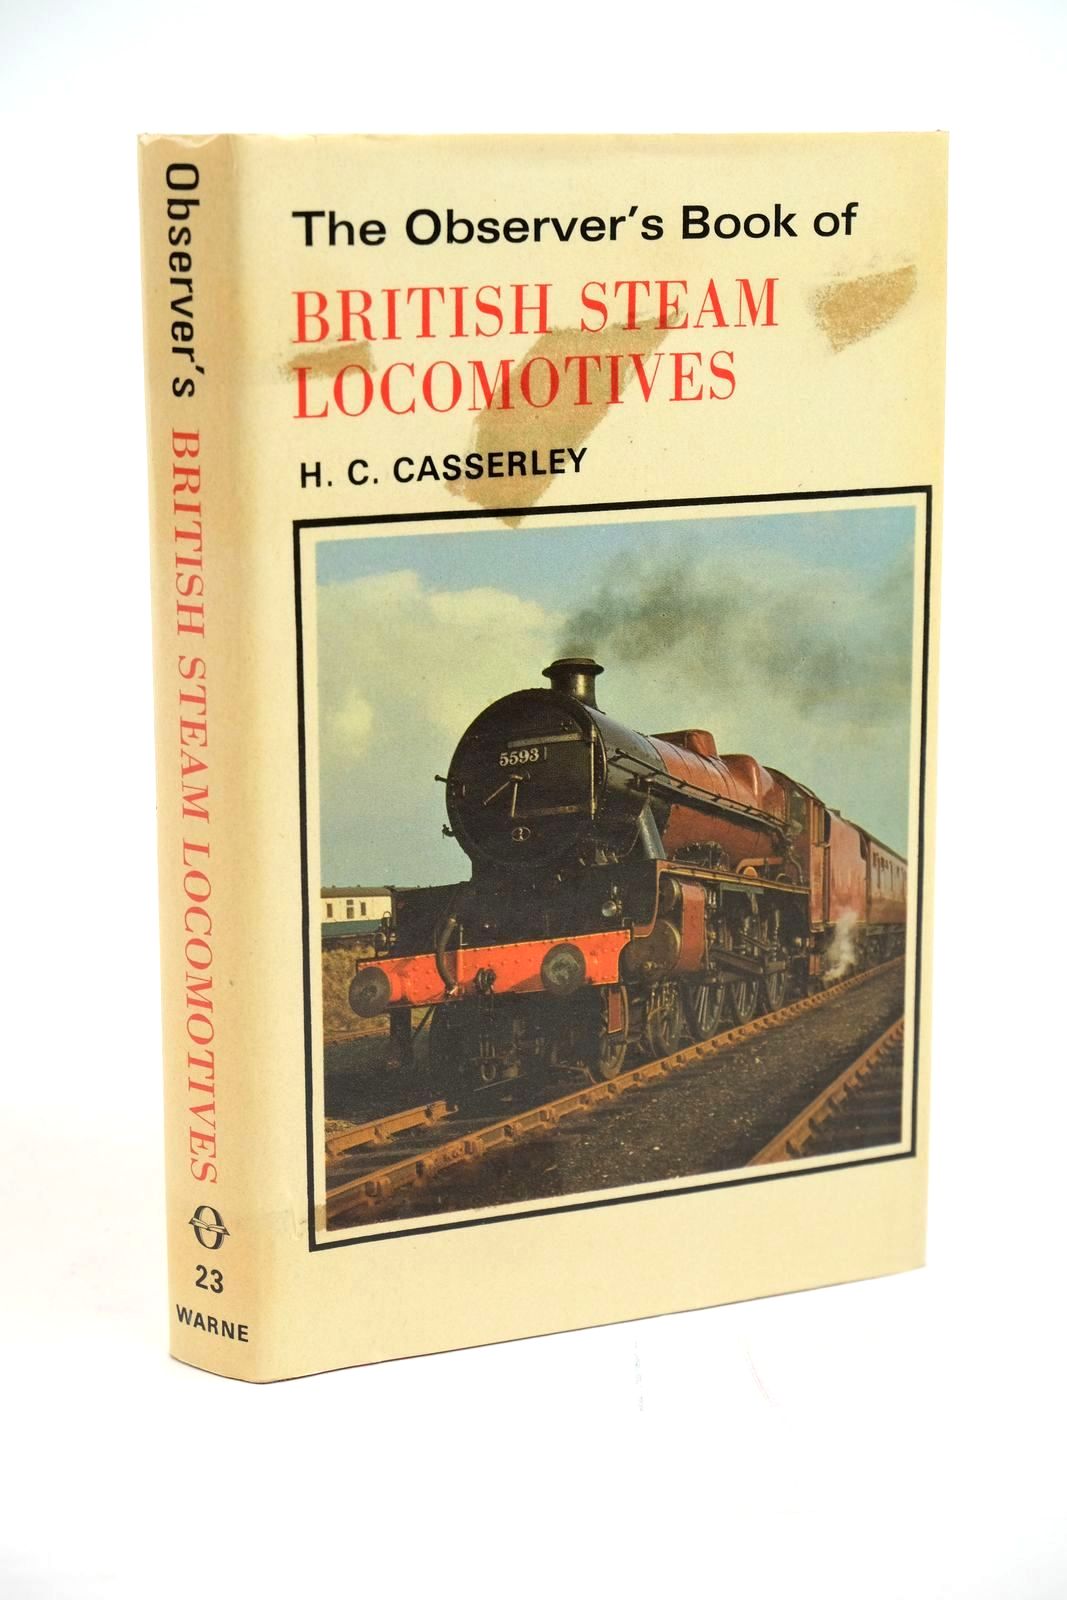 Photo of THE OBSERVER'S BOOK OF BRITISH STEAM LOCOMOTIVES written by Casserley, H.C. published by Frederick Warne & Co Ltd. (STOCK CODE: 1321419)  for sale by Stella & Rose's Books